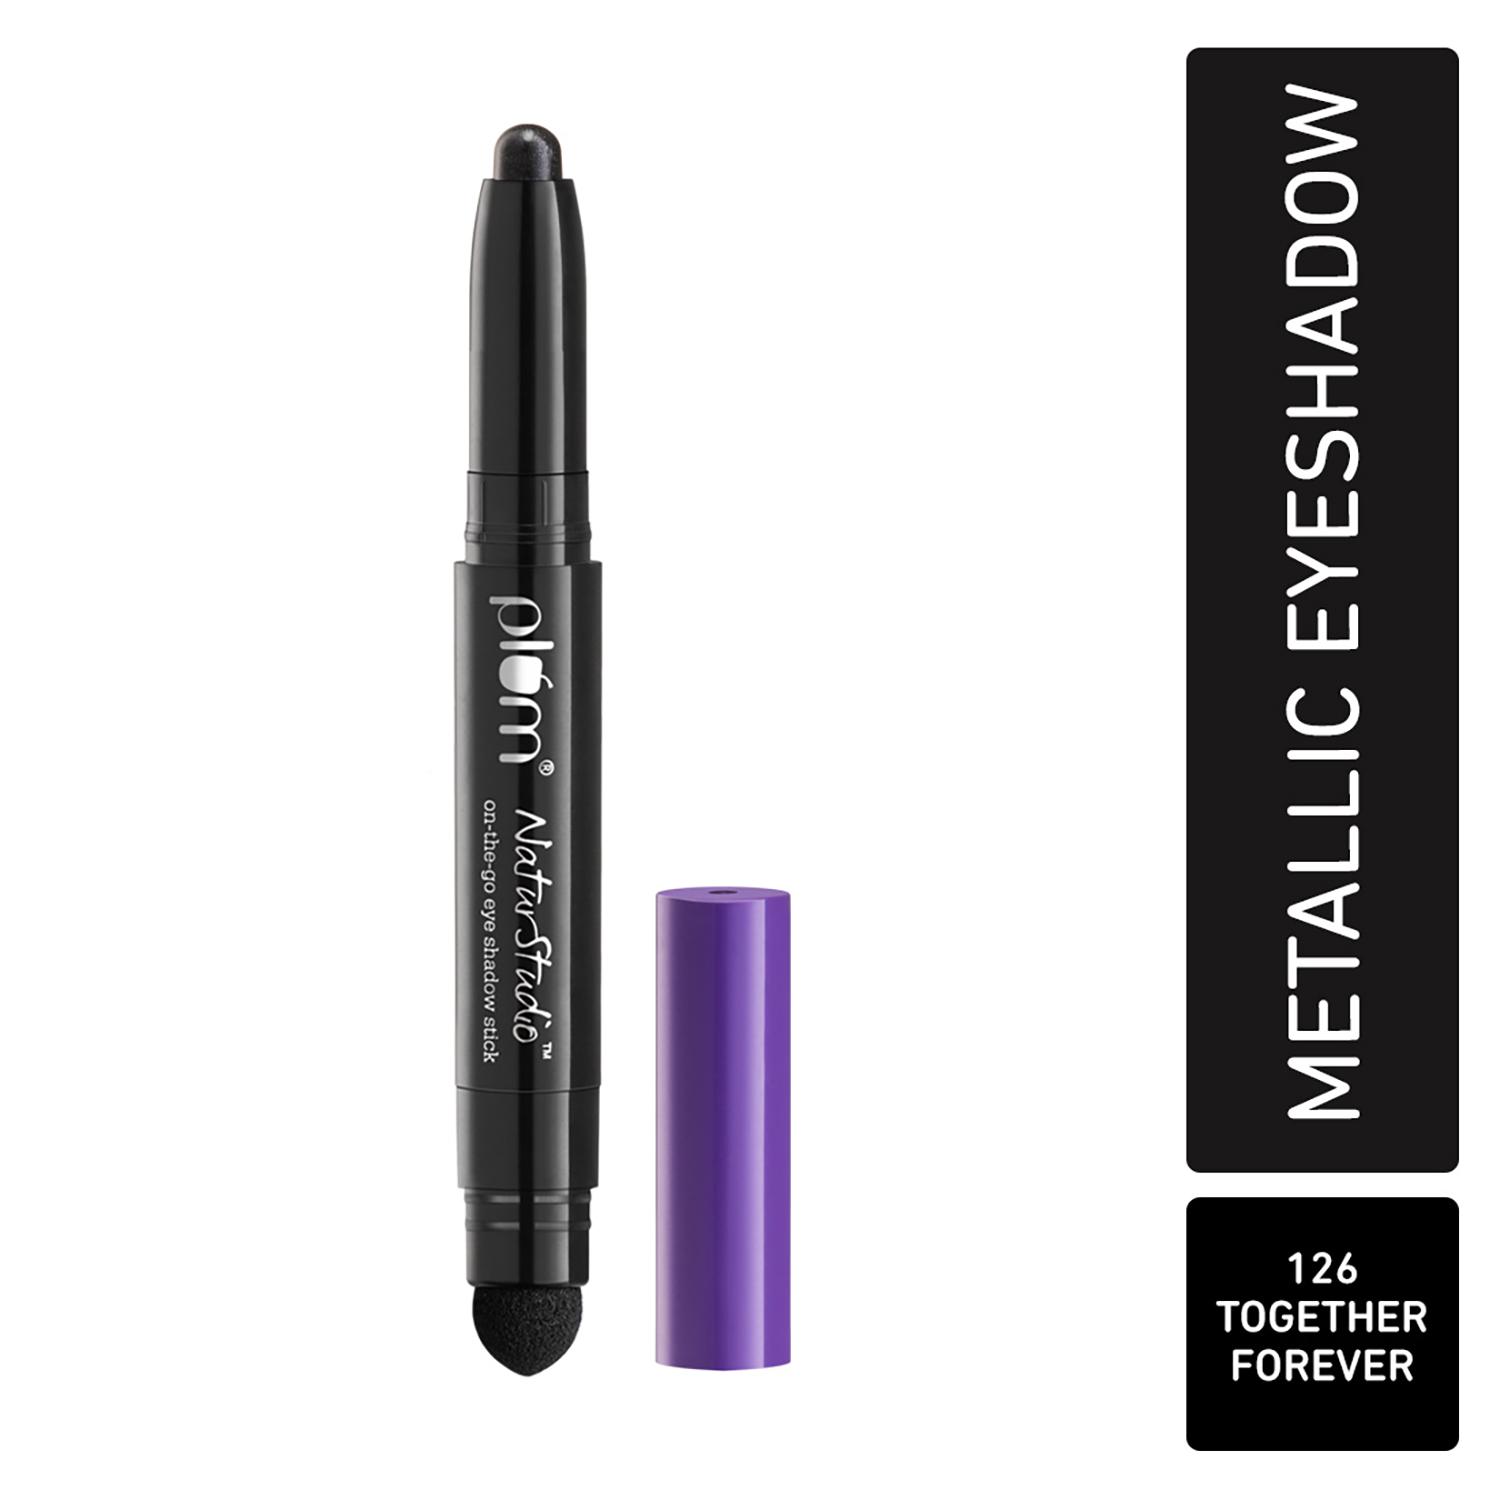 Plum NaturStudio on-the-go Eyeshadow Stick Waterproof & Crease-proof 126 Together Forever (1.2 g)